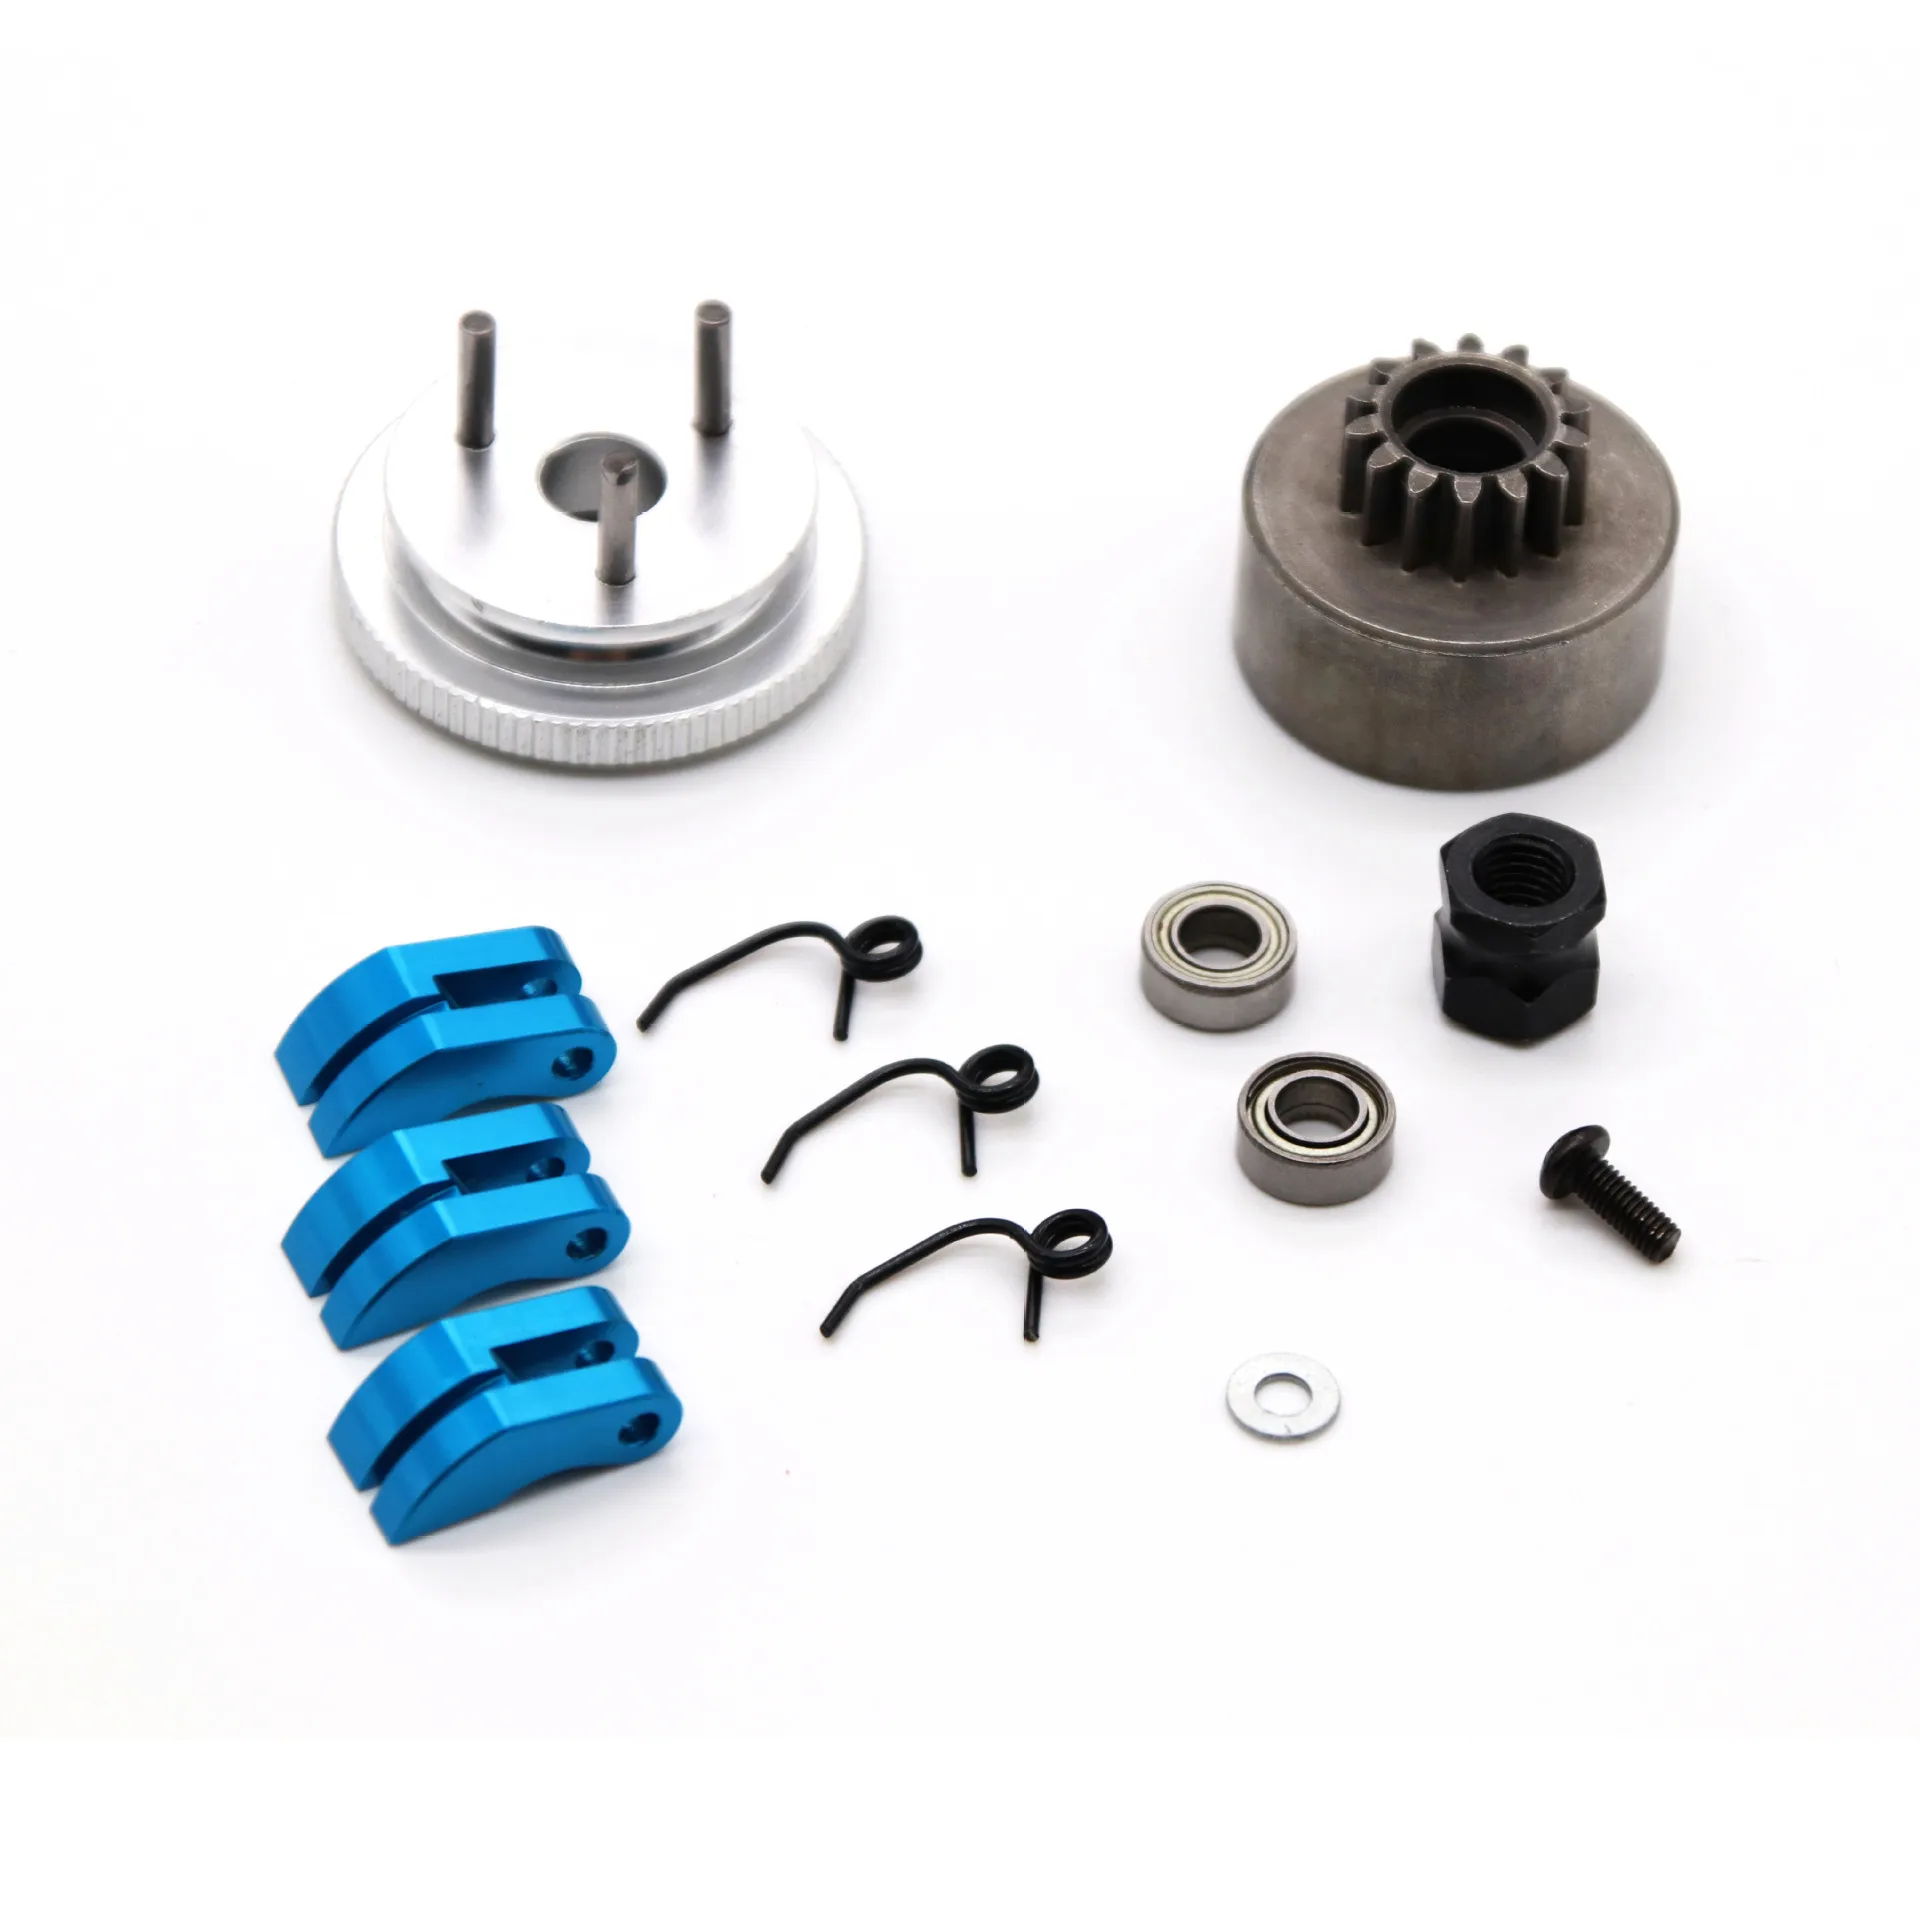 Blue Clutch Bell Shoes Bearing 14T Gear Flywheel Assembly Kit Set Springs Cone Engine Nut for 1/8 RC Hobby Model Nitro Car HPI HSP Traxxas Axial Himoto 